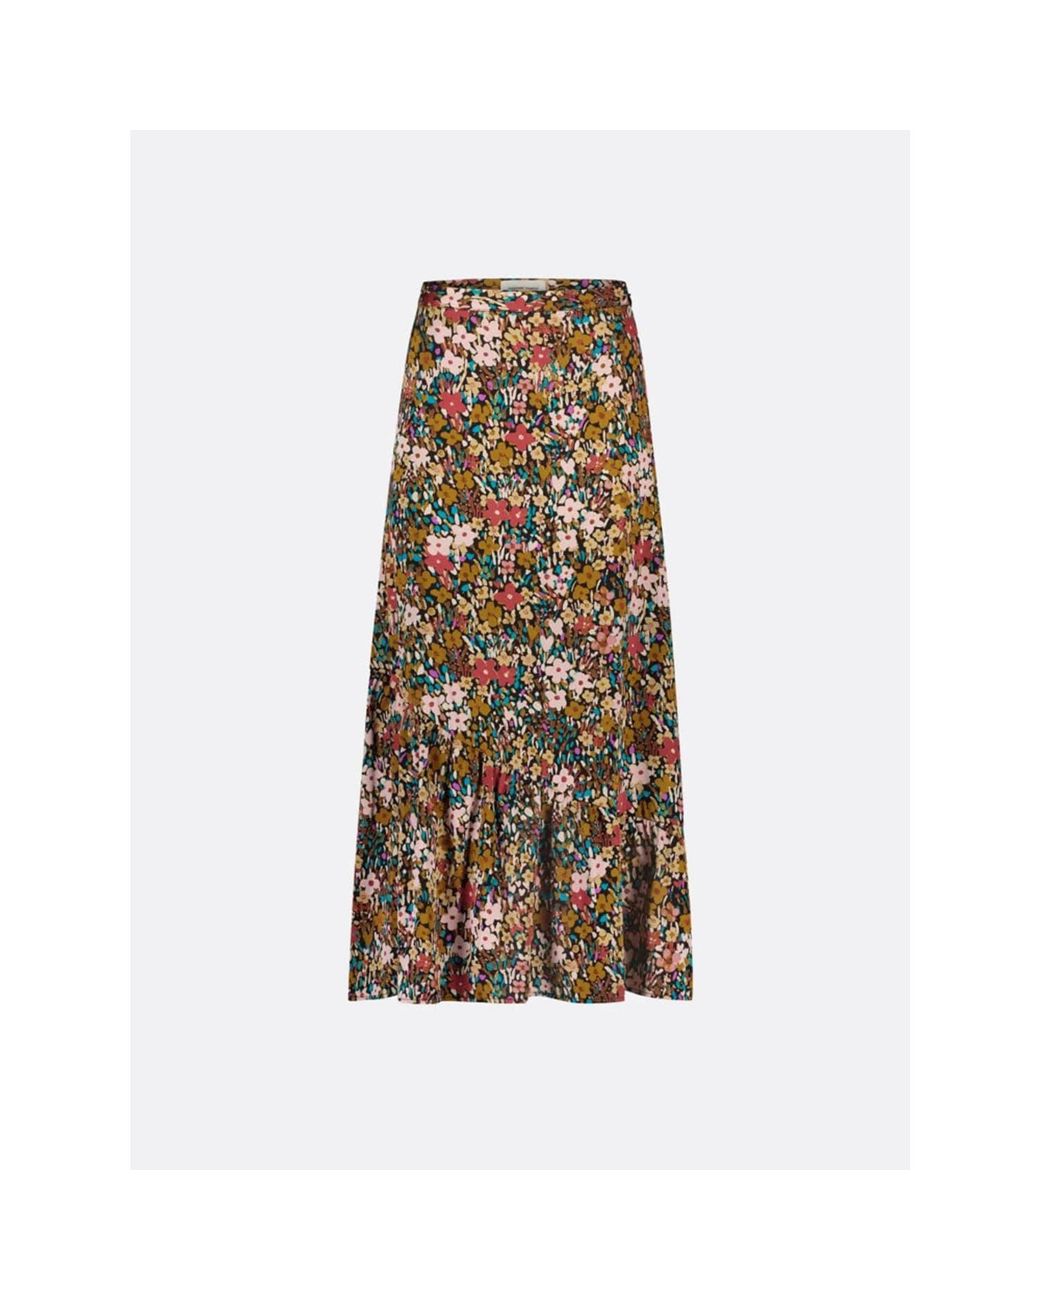 FABIENNE CHAPOT Black Cleo Skirt in Natural | Lyst